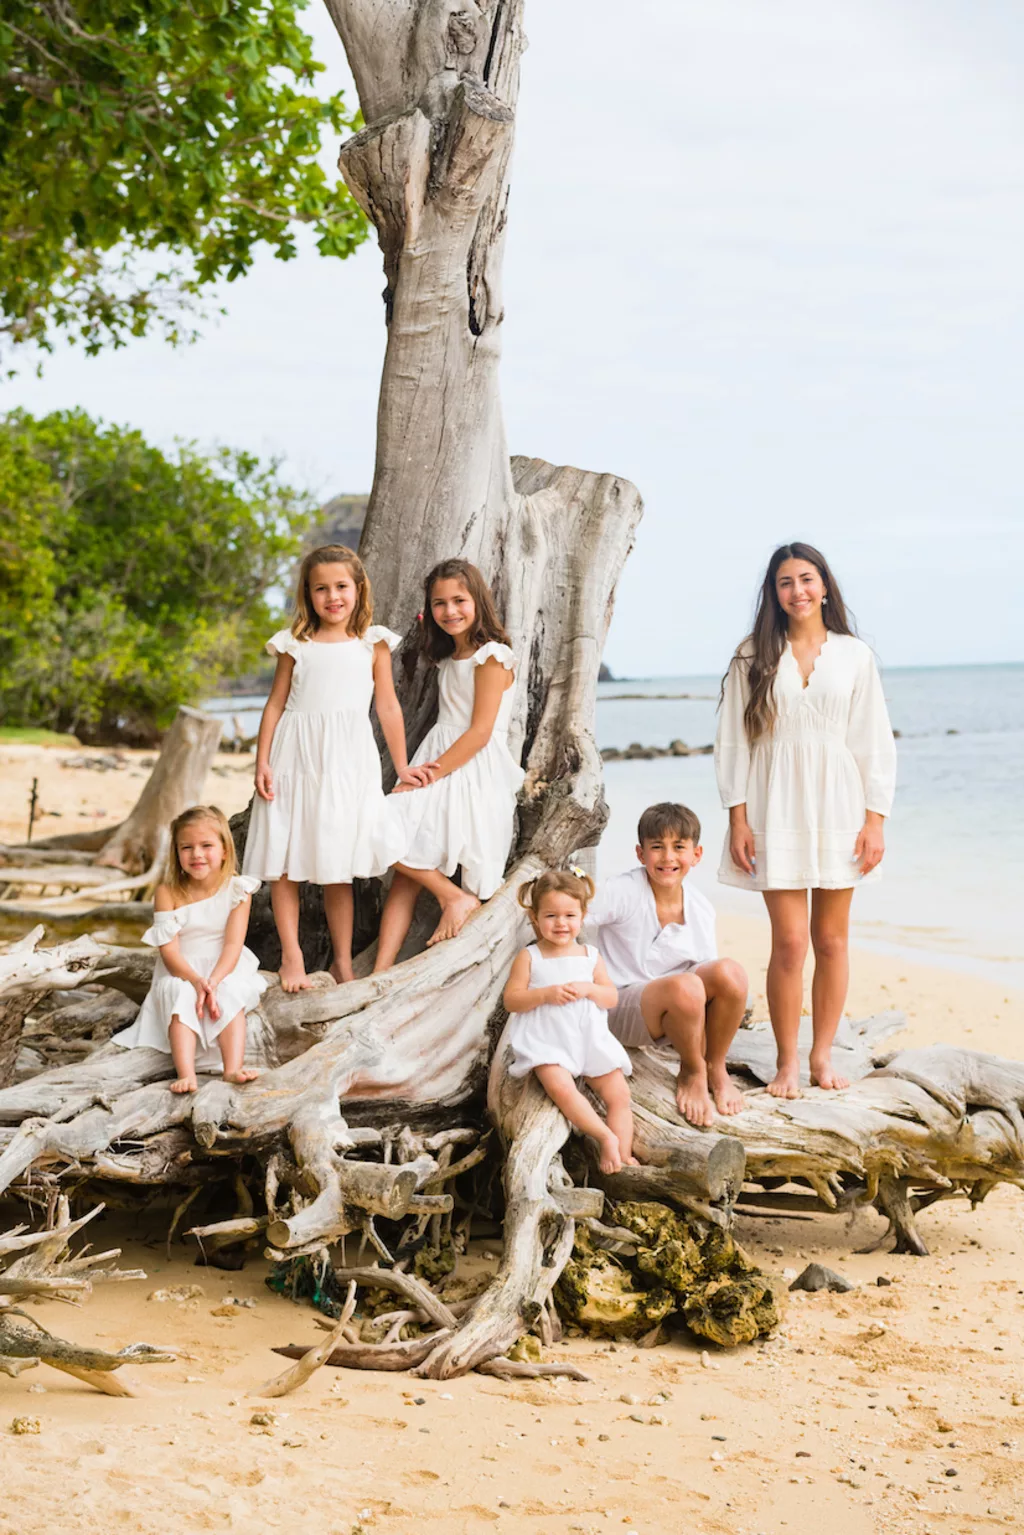 an image of 6 siblings wearing all white sitting and standing on tree branch at the beach